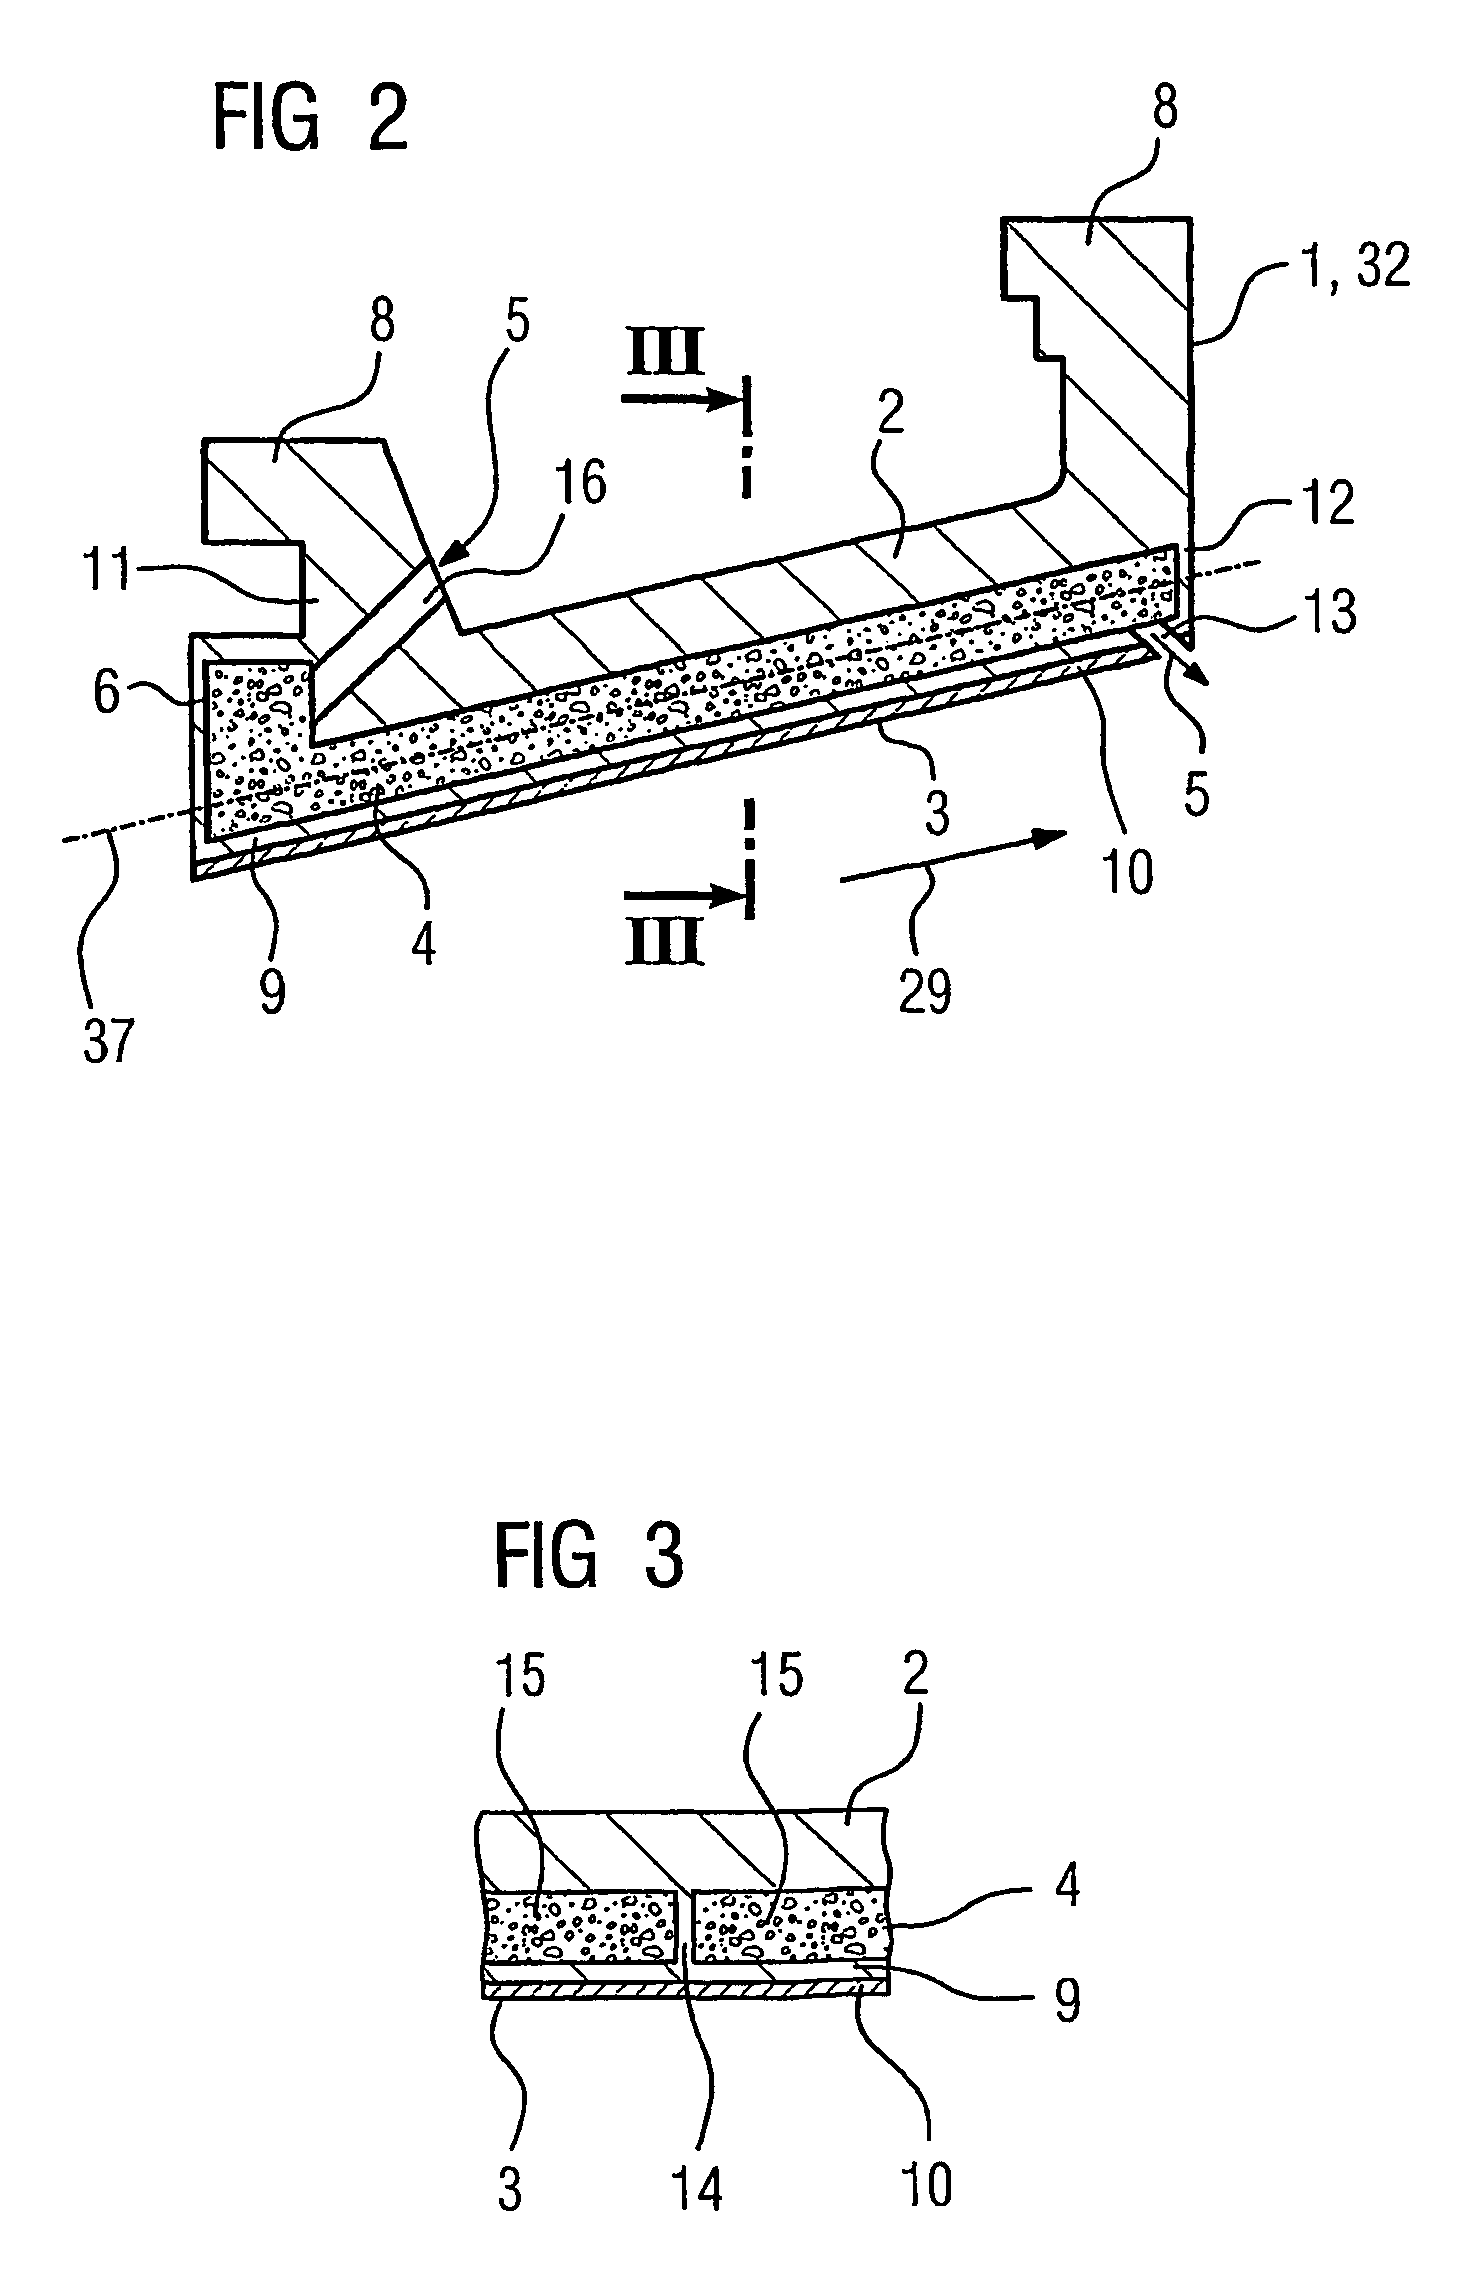 Coolable segment for a turbomachine and combustion turbine